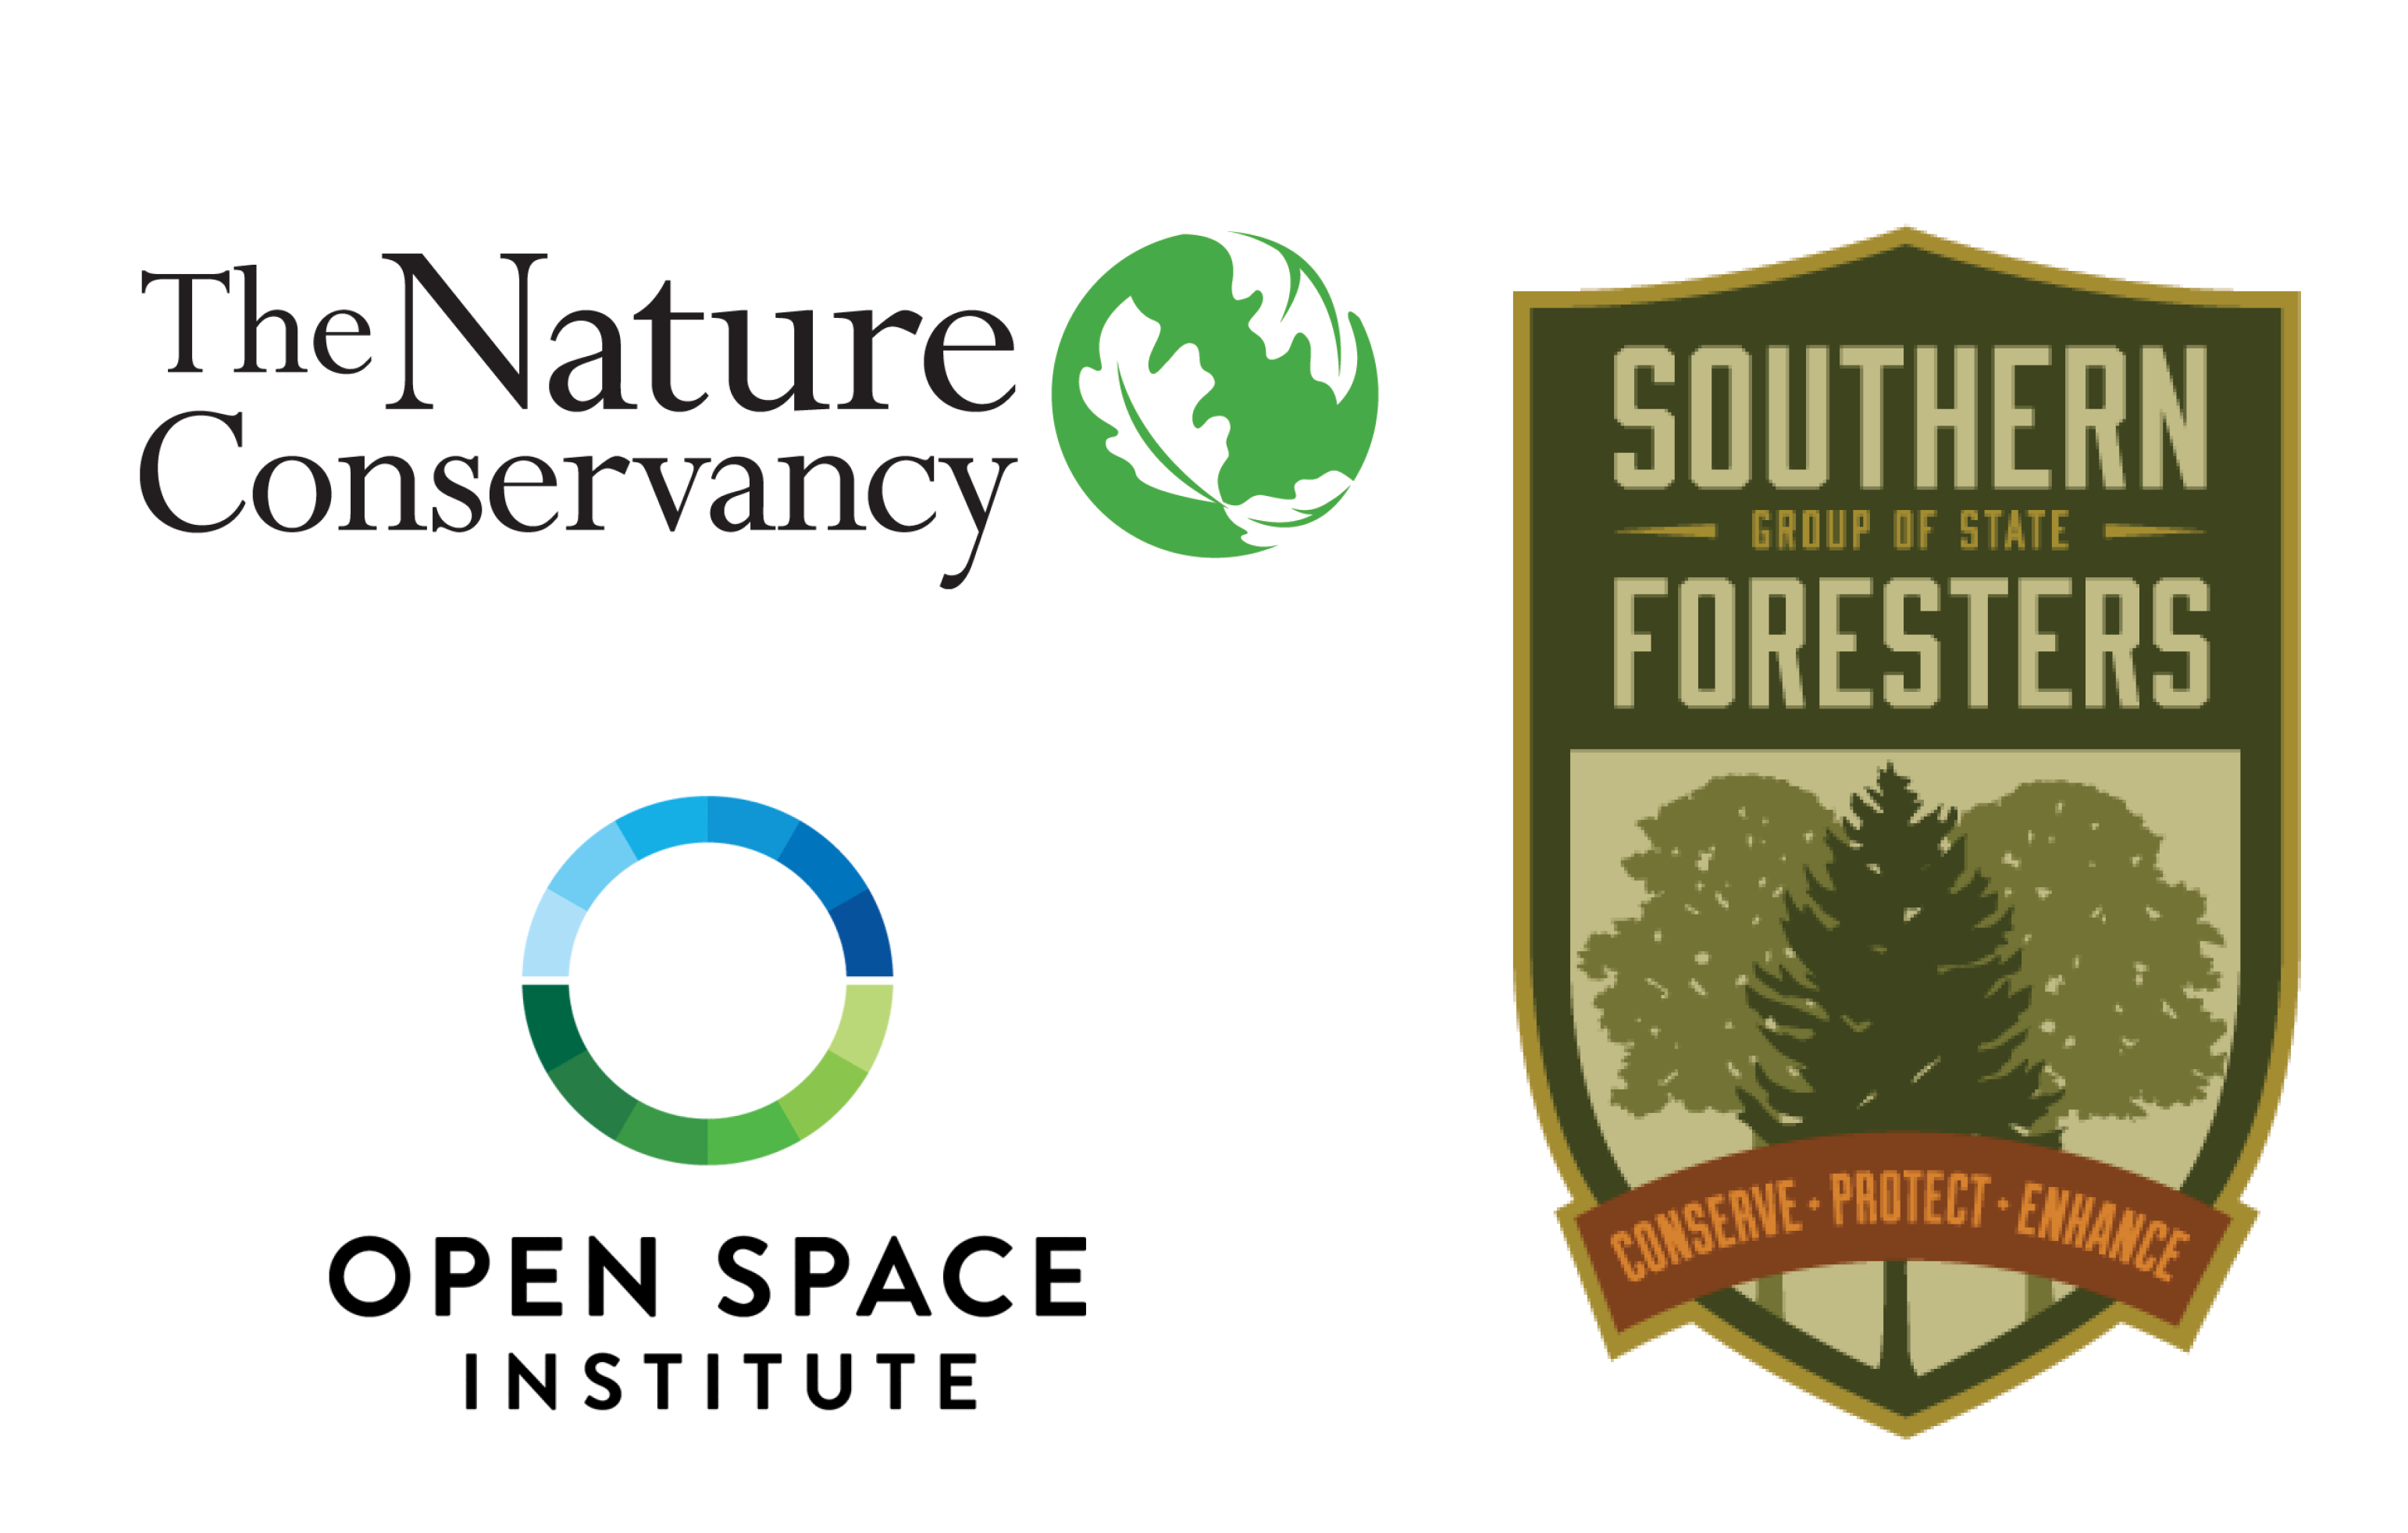 The Nature Conservancy, Open Space Institute, and Southern Group of State Foresters logos.